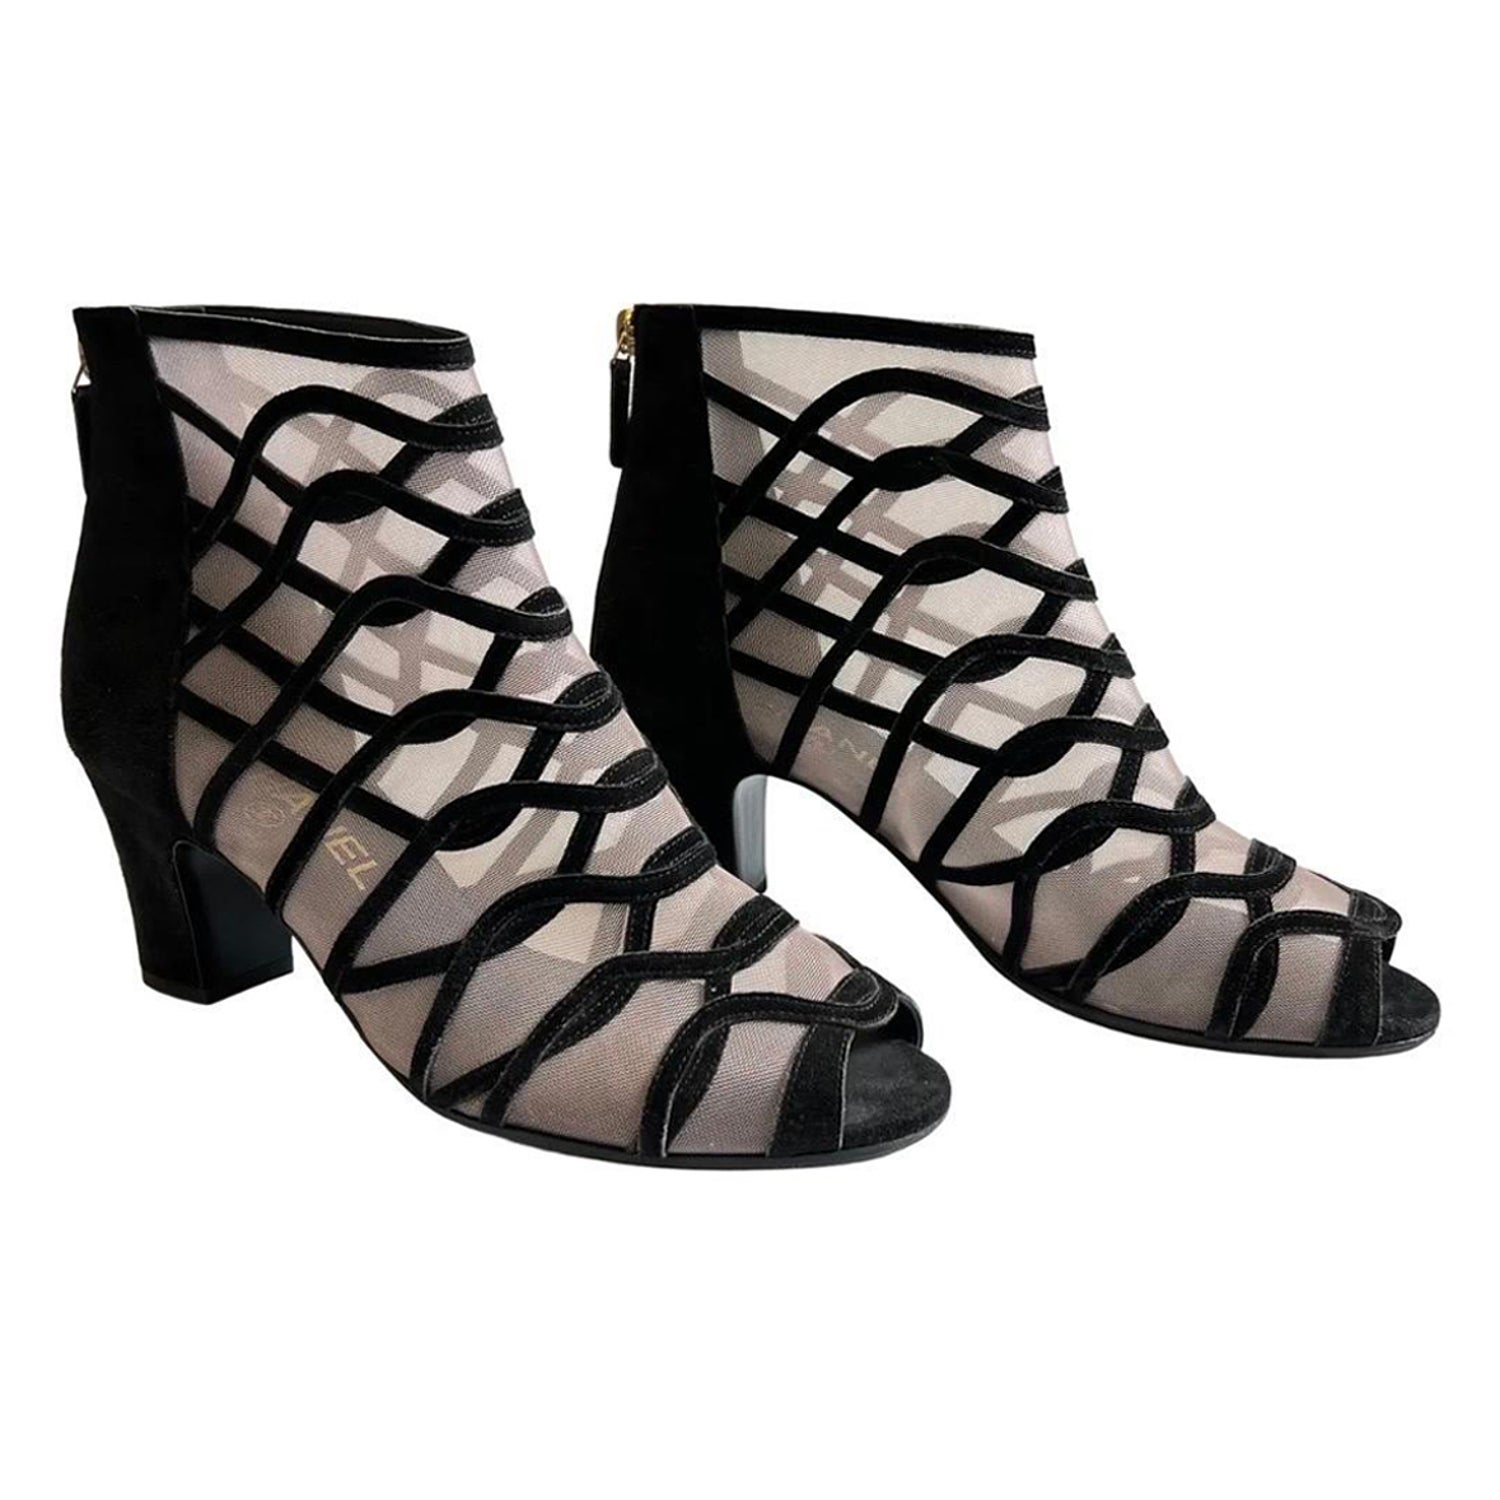 Chanel Cage Heels - 4 For Sale on 1stDibs